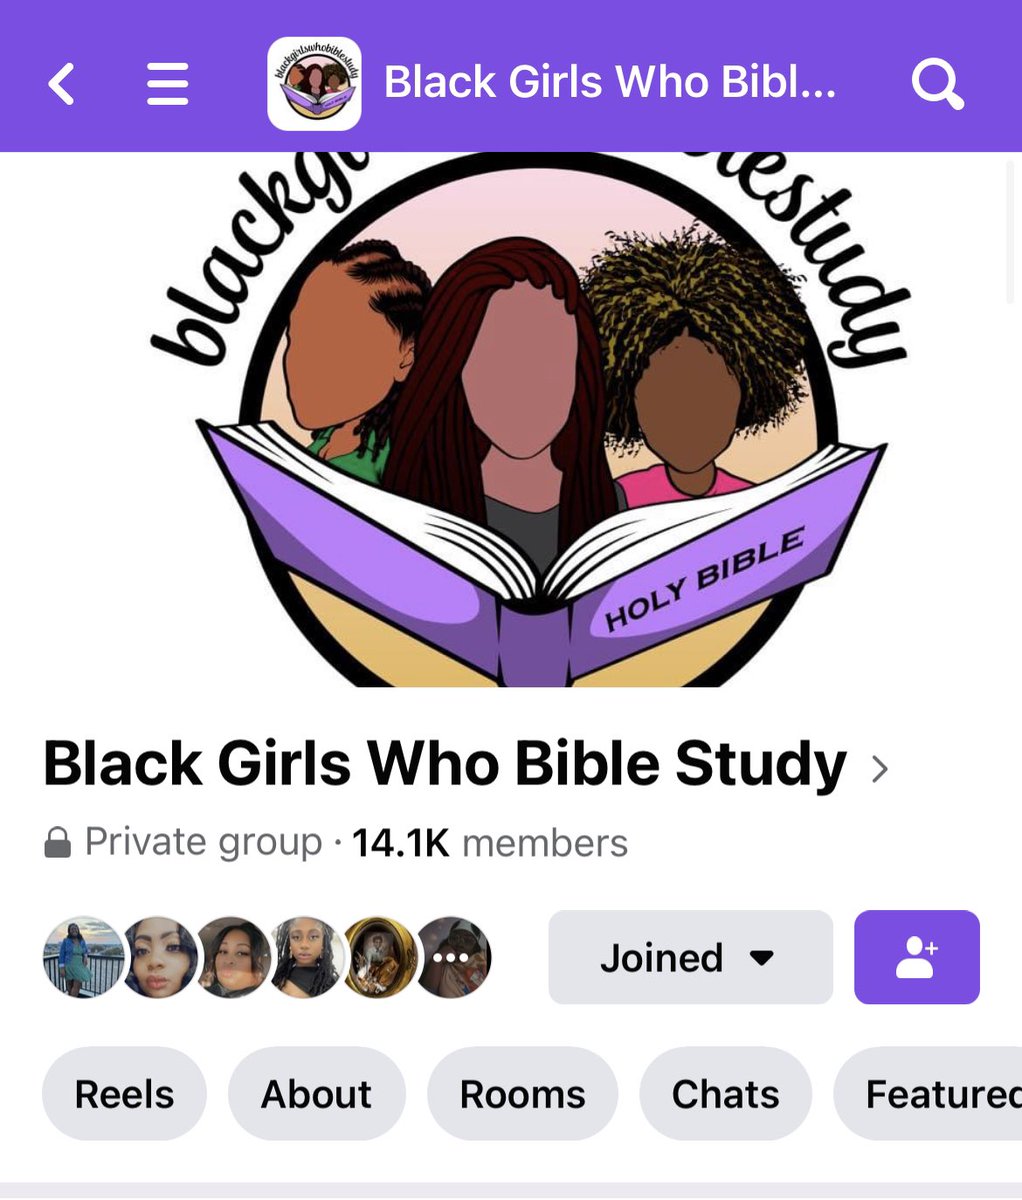 Share your book club in the comments. These are my two favorite. Join via FB. Link in comments. 📚📙📖📘📚📓
#BlackGirlsWhoBibleStudy #BlackGirlsWriteToo #perfectyourcraft #biblestudy #reader #writer #creatives #wearewriters #bookclubs #TW #thescripturient #thewriter #literature